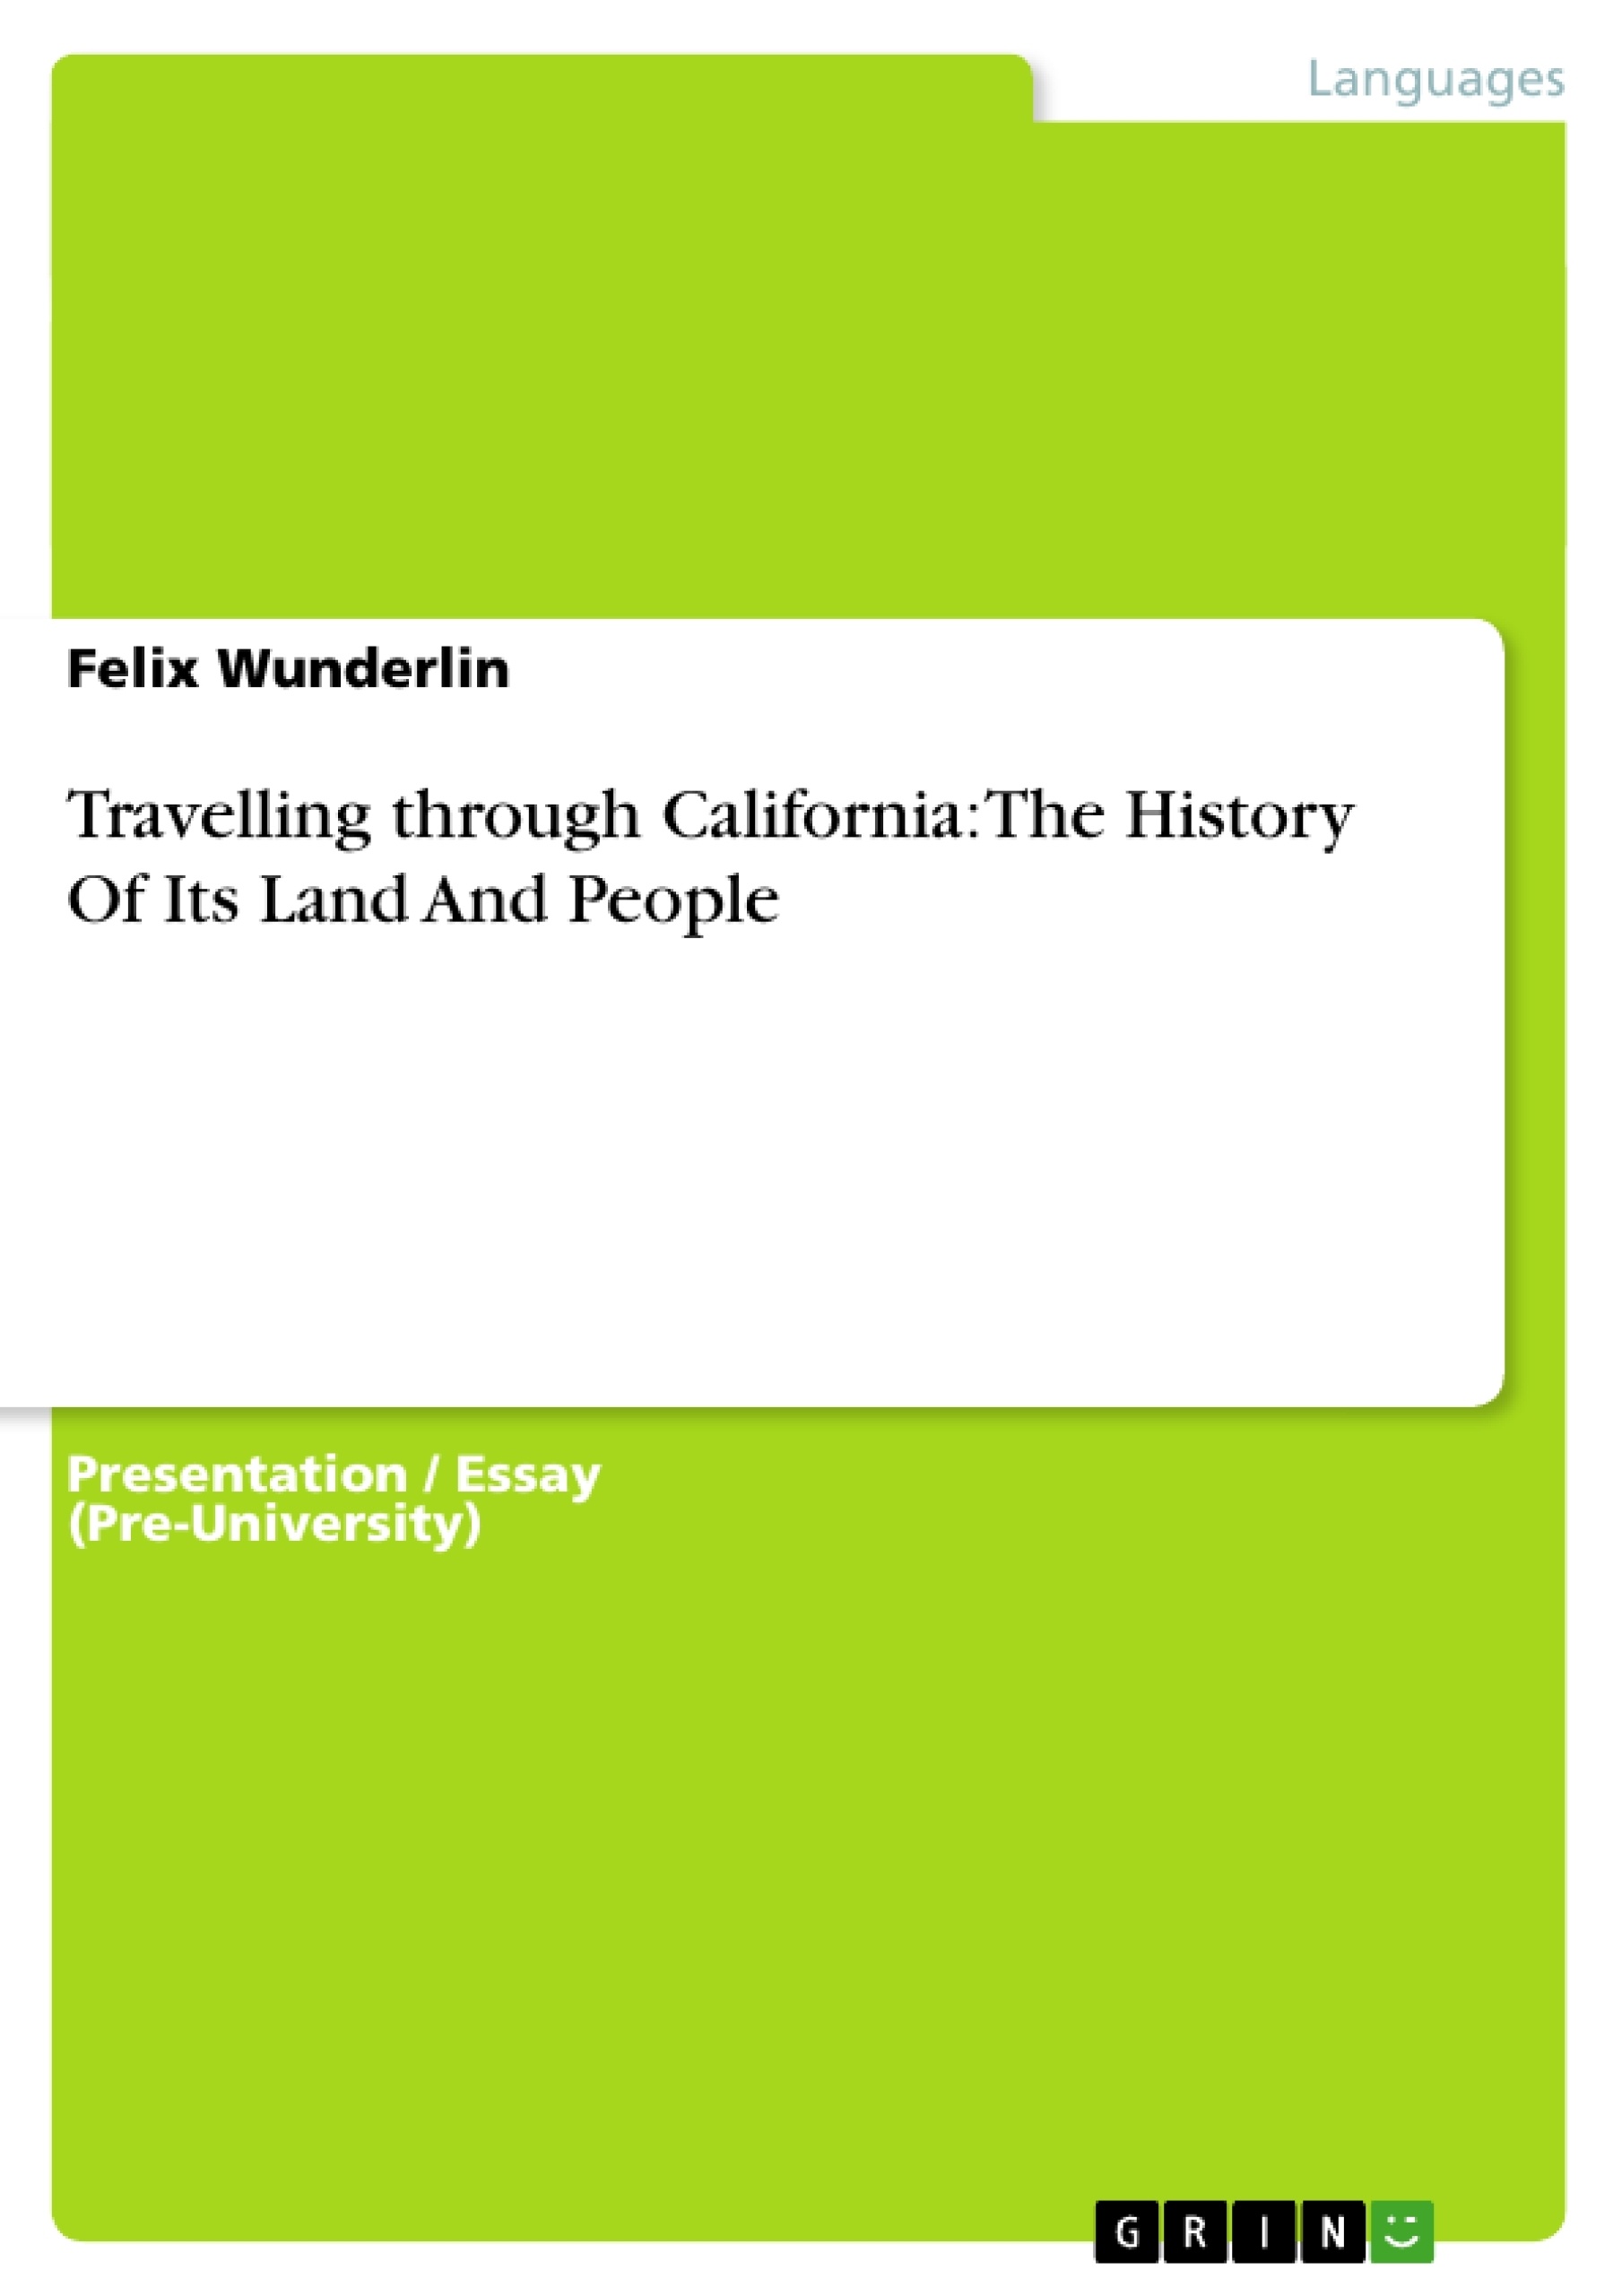 Title: Travelling through California: The History Of Its Land And People